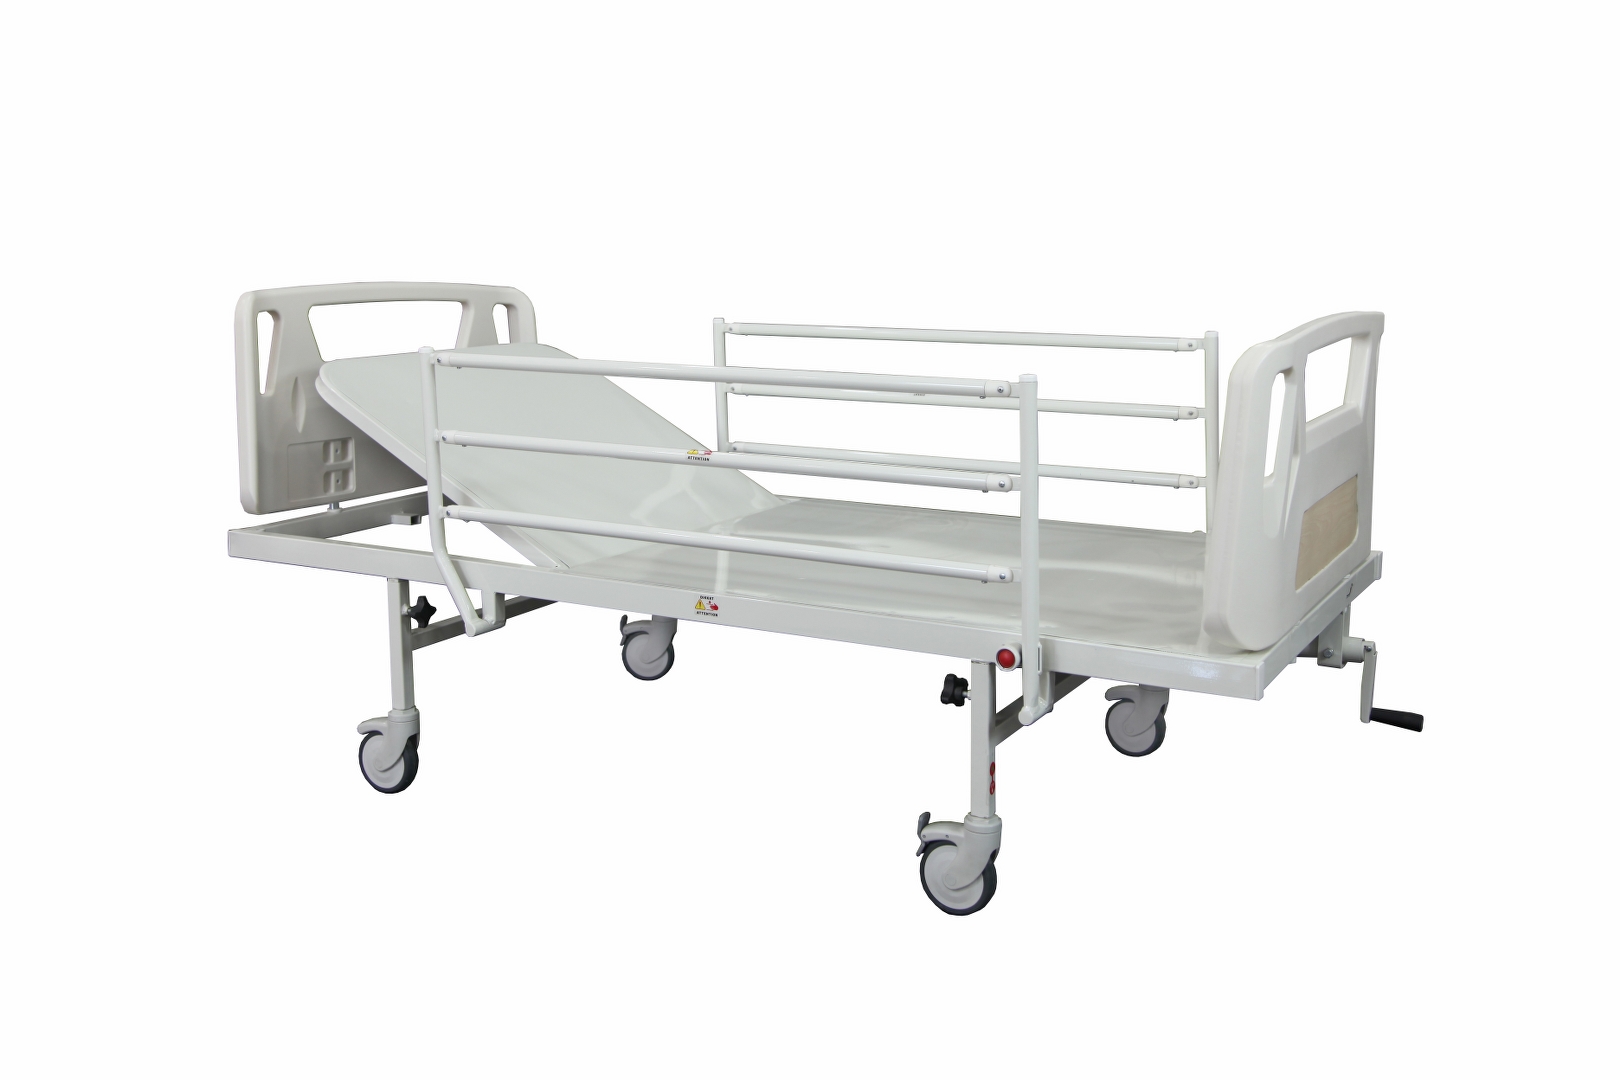 HKM-TC10 MECHANICAL HOSPITAL BED WITH ONE ADJUSTMENT Detail 1